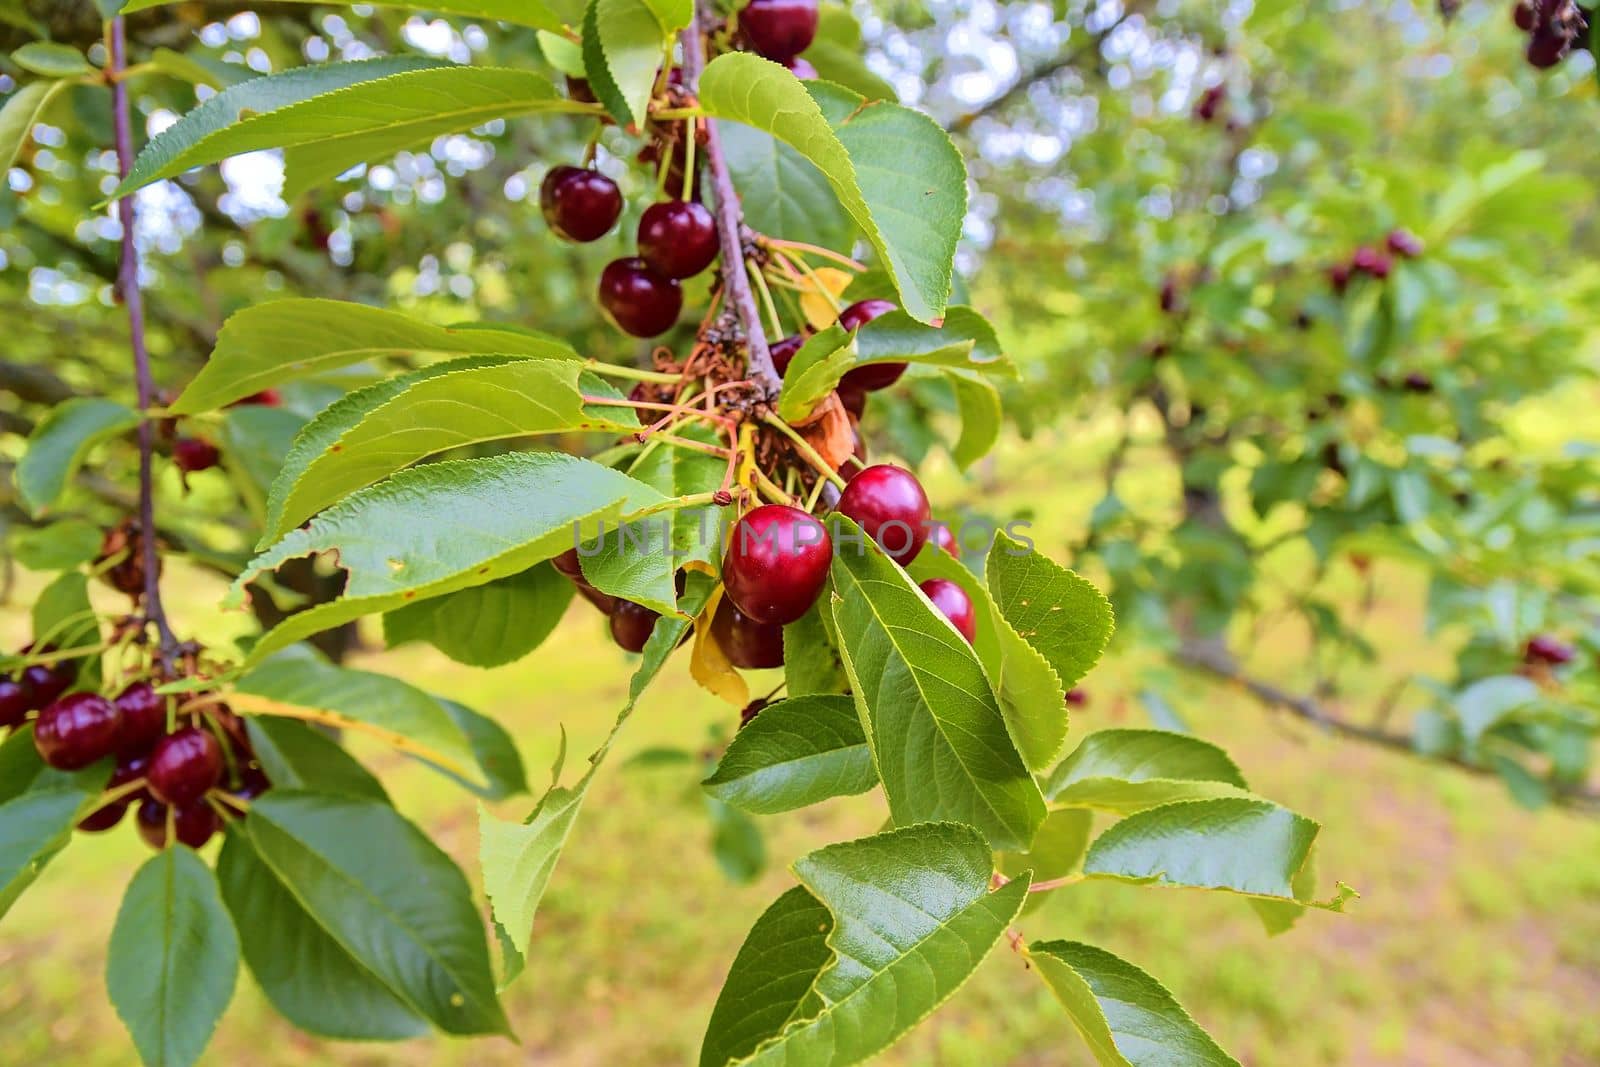 Sour cherries with leaf. Sour cherry tree. Sour cherry fruits hanging on branch.